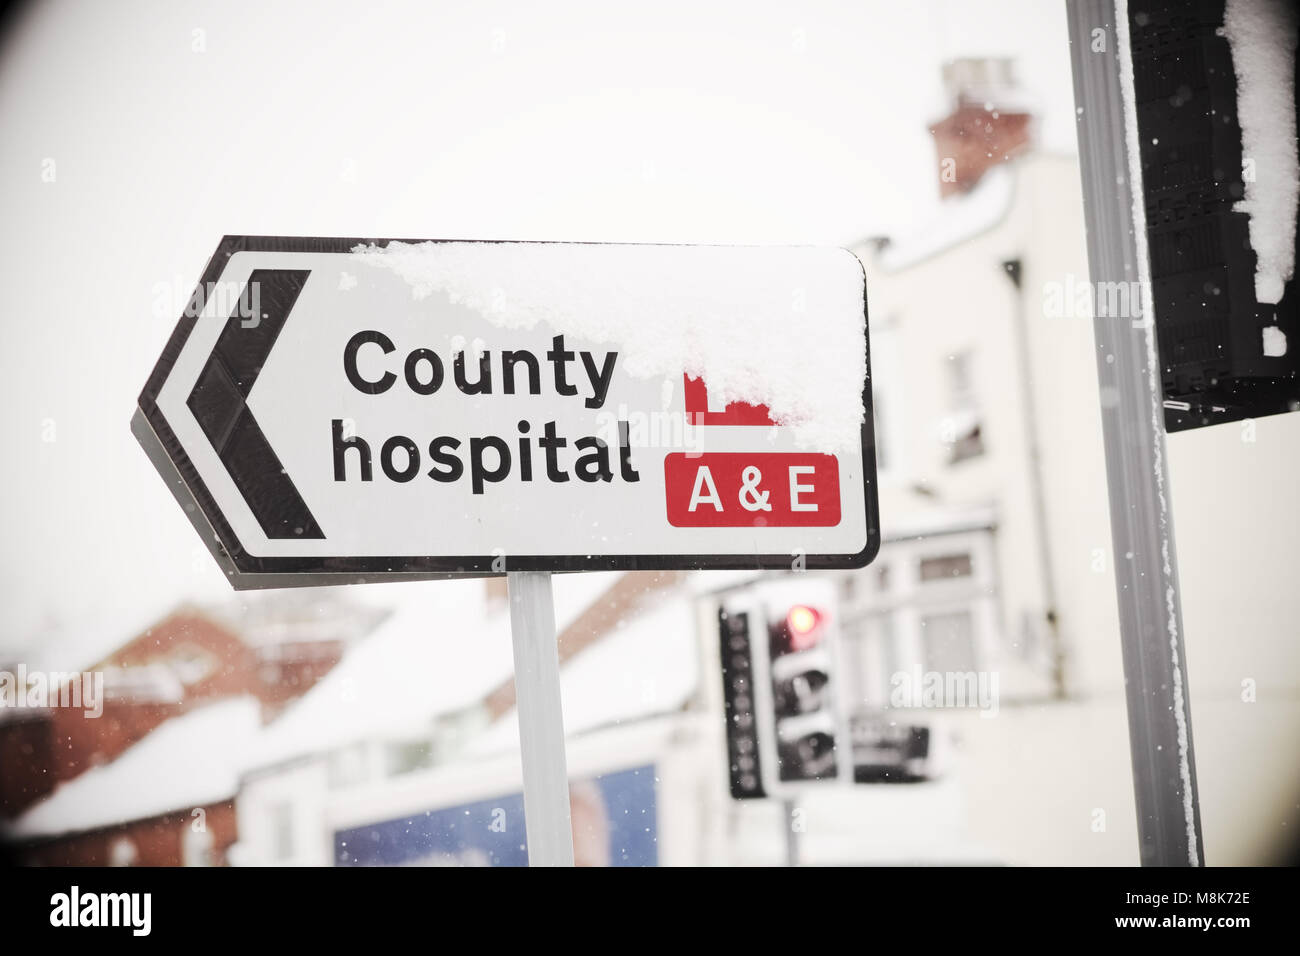 A&E County Hospital National Health Service sign in town centre UK in winter with snow Stock Photo